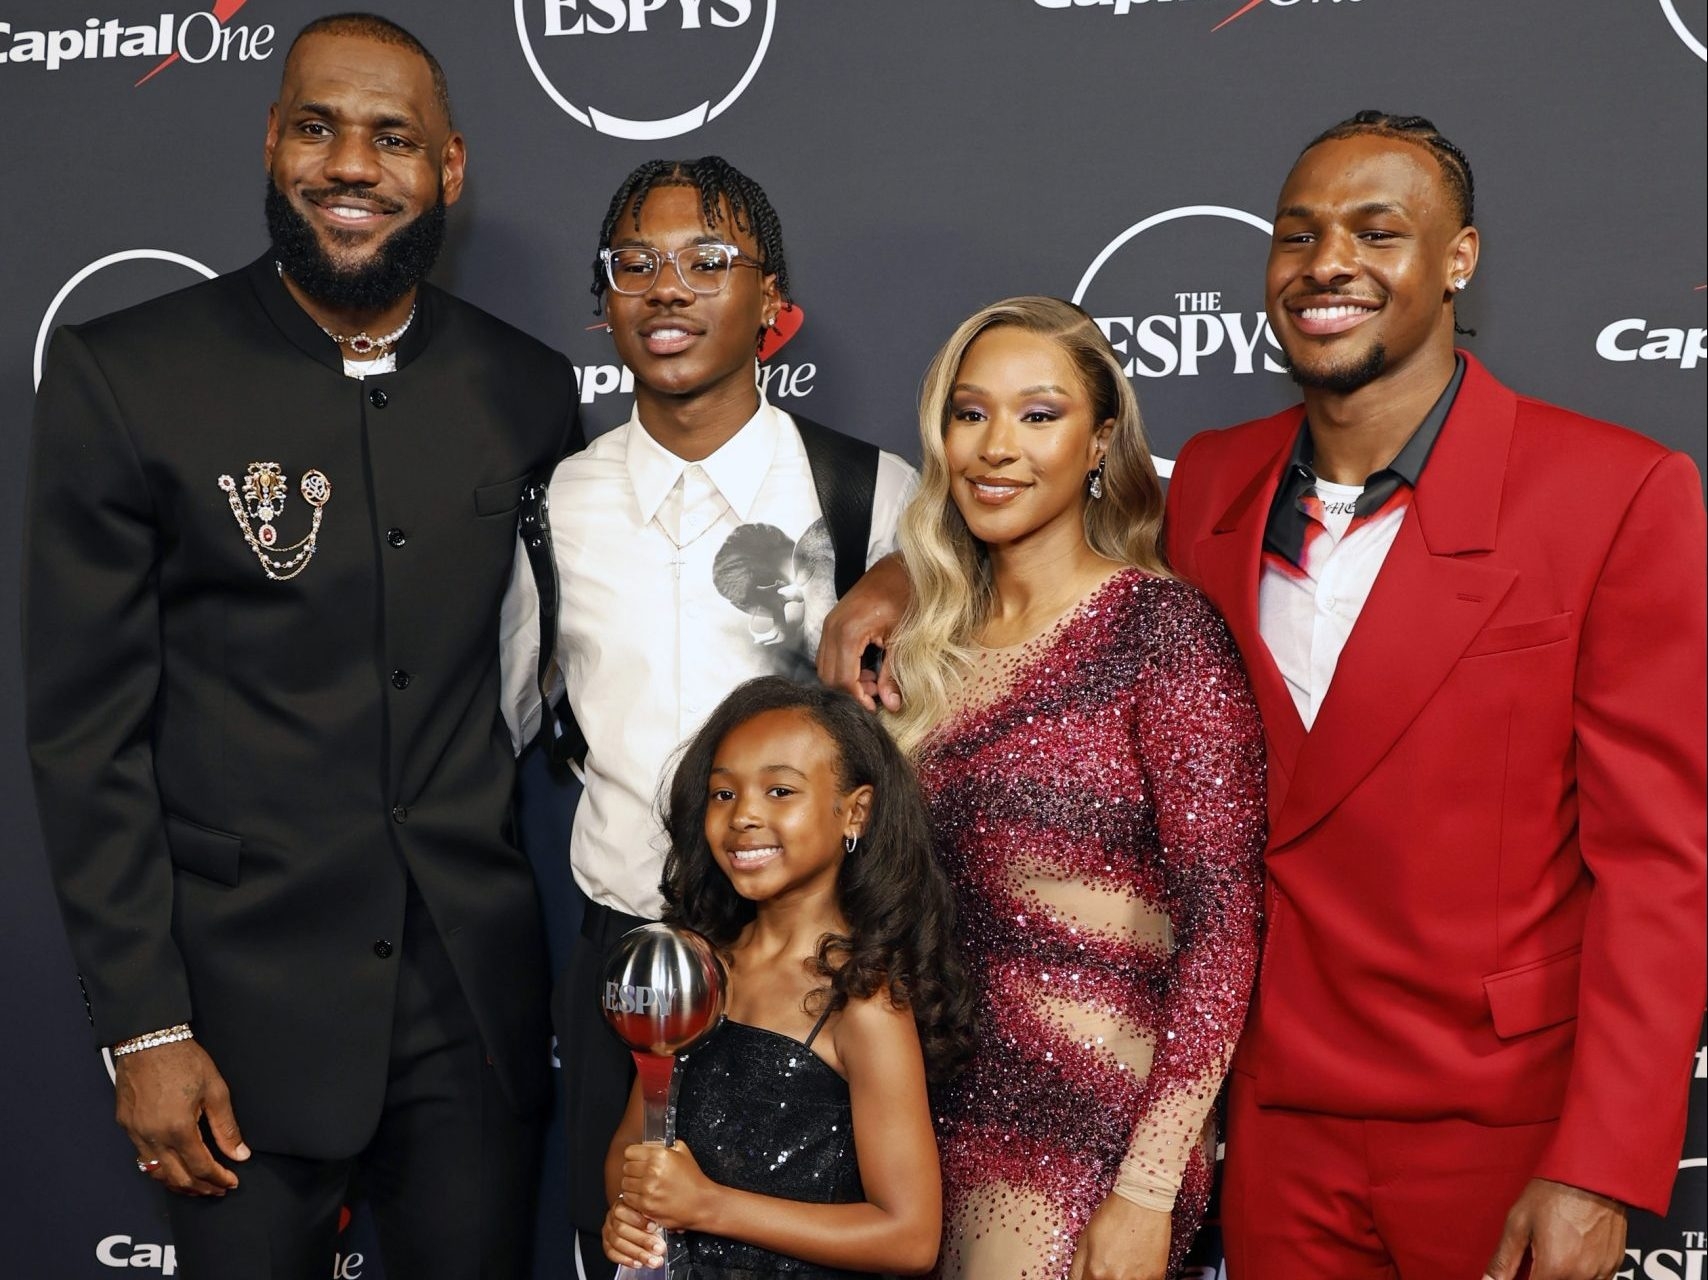 LeBron James tells ESPYs he will play for Lakers in coming season